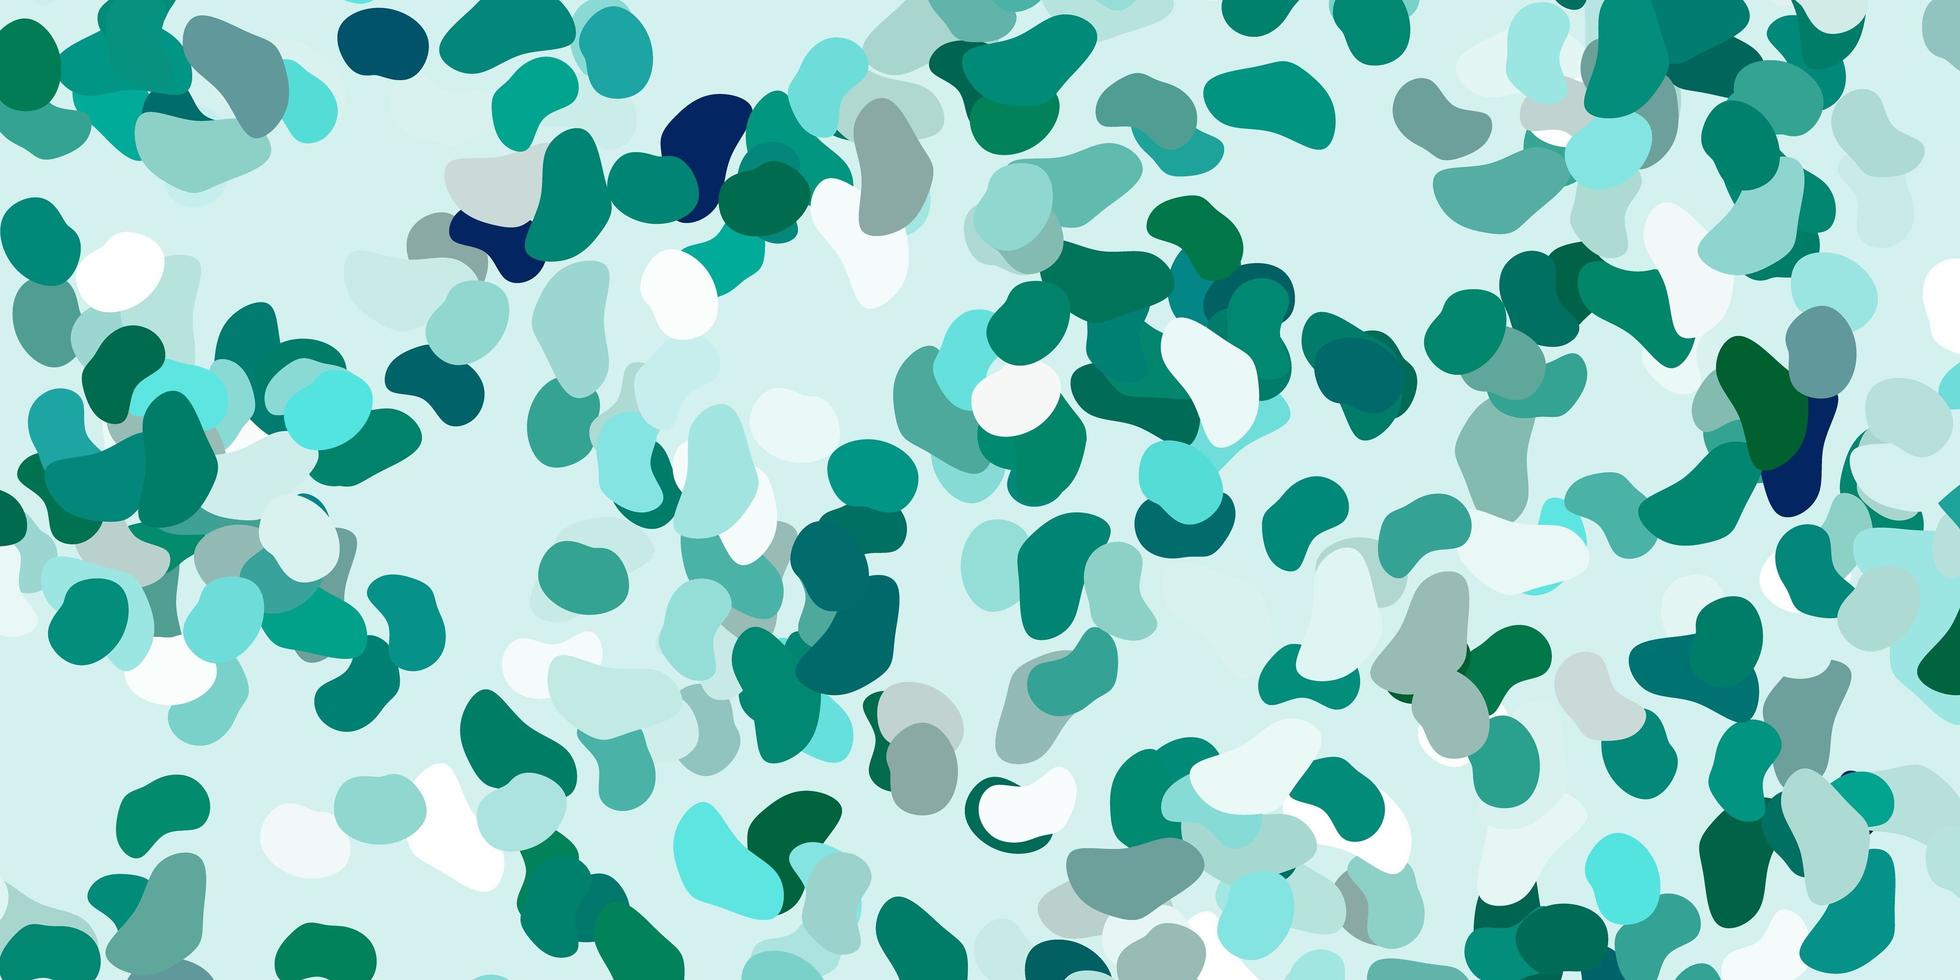 Light green vector texture with memphis shapes